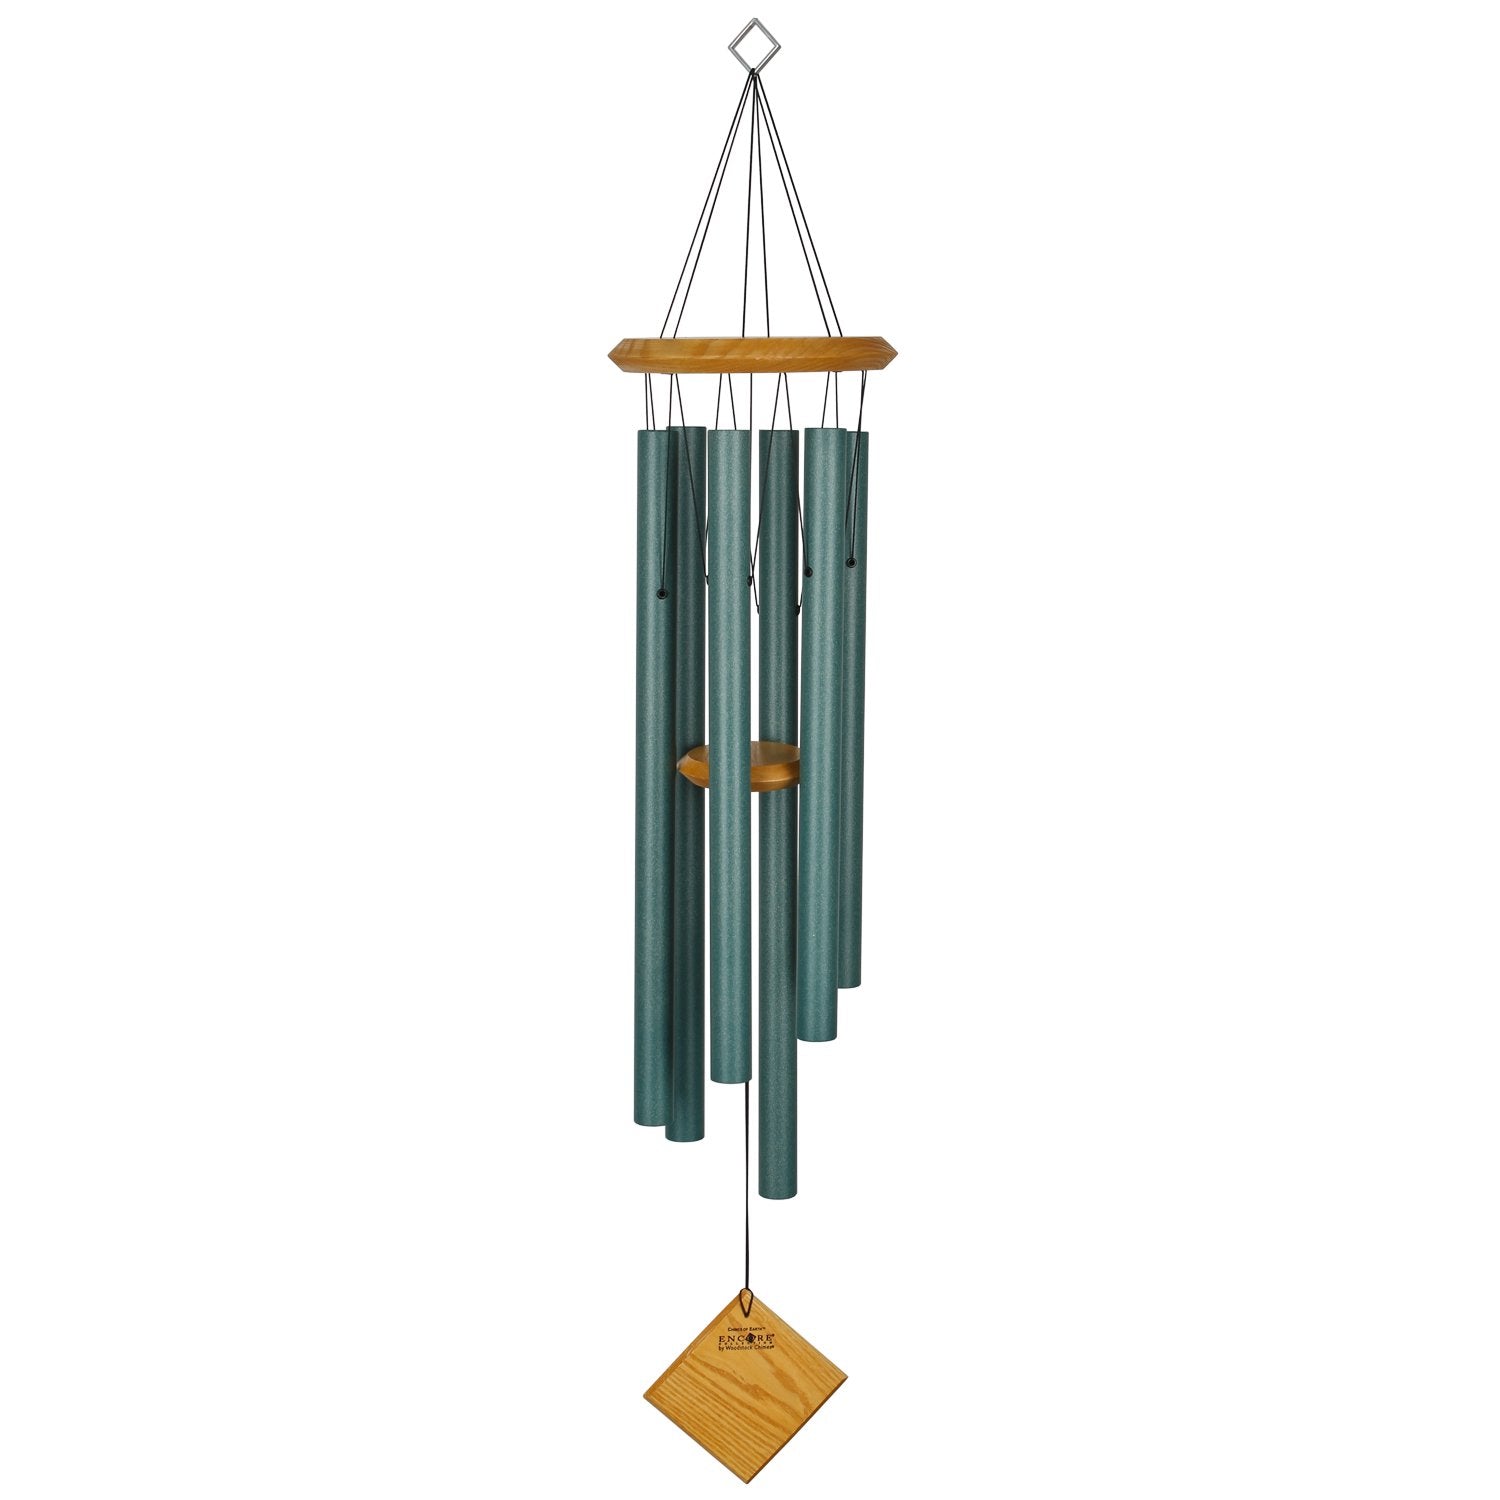 Encore Chimes of Earth - Verdigris full product image